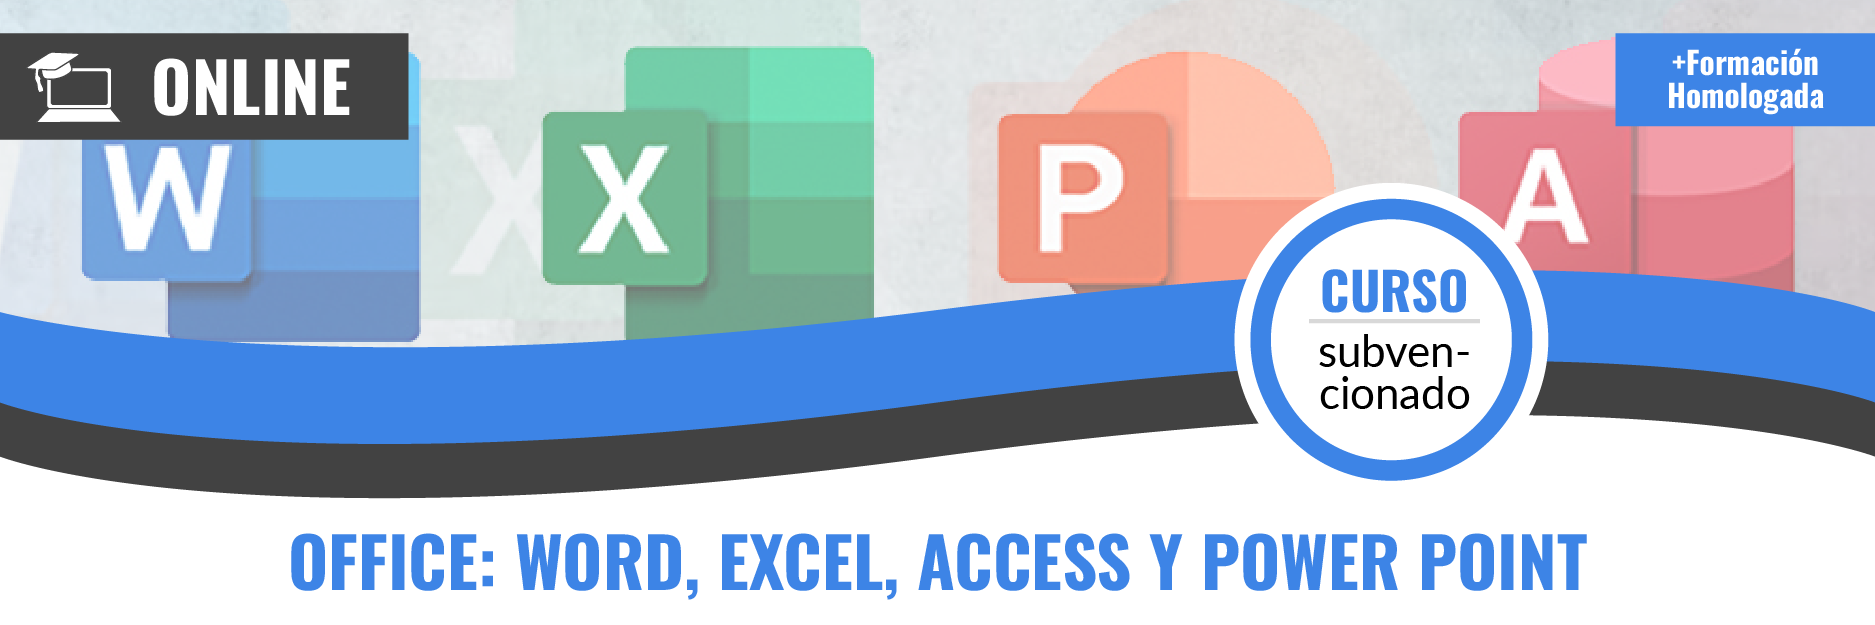 adgg052po-office-word-excel-access-y-power-point-curso-online.jpg